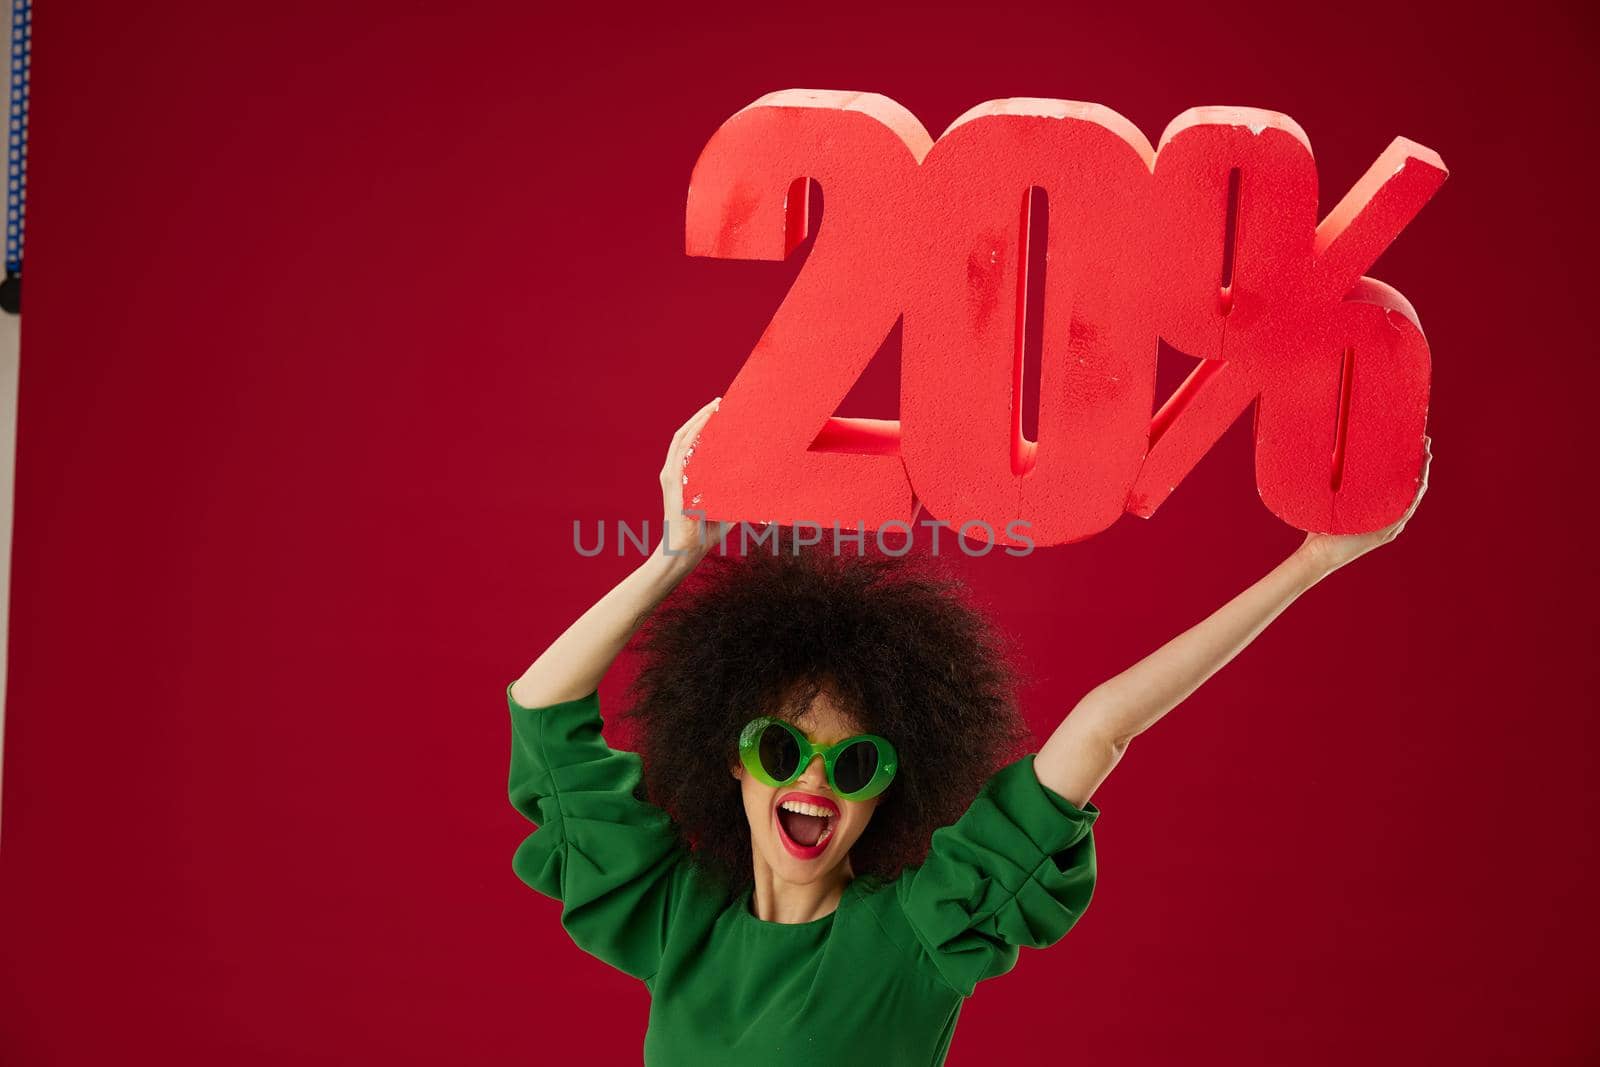 Portrait of a charming lady green dress afro hairstyle dark glasses twenty percent in hands red background unaltered. High quality photo